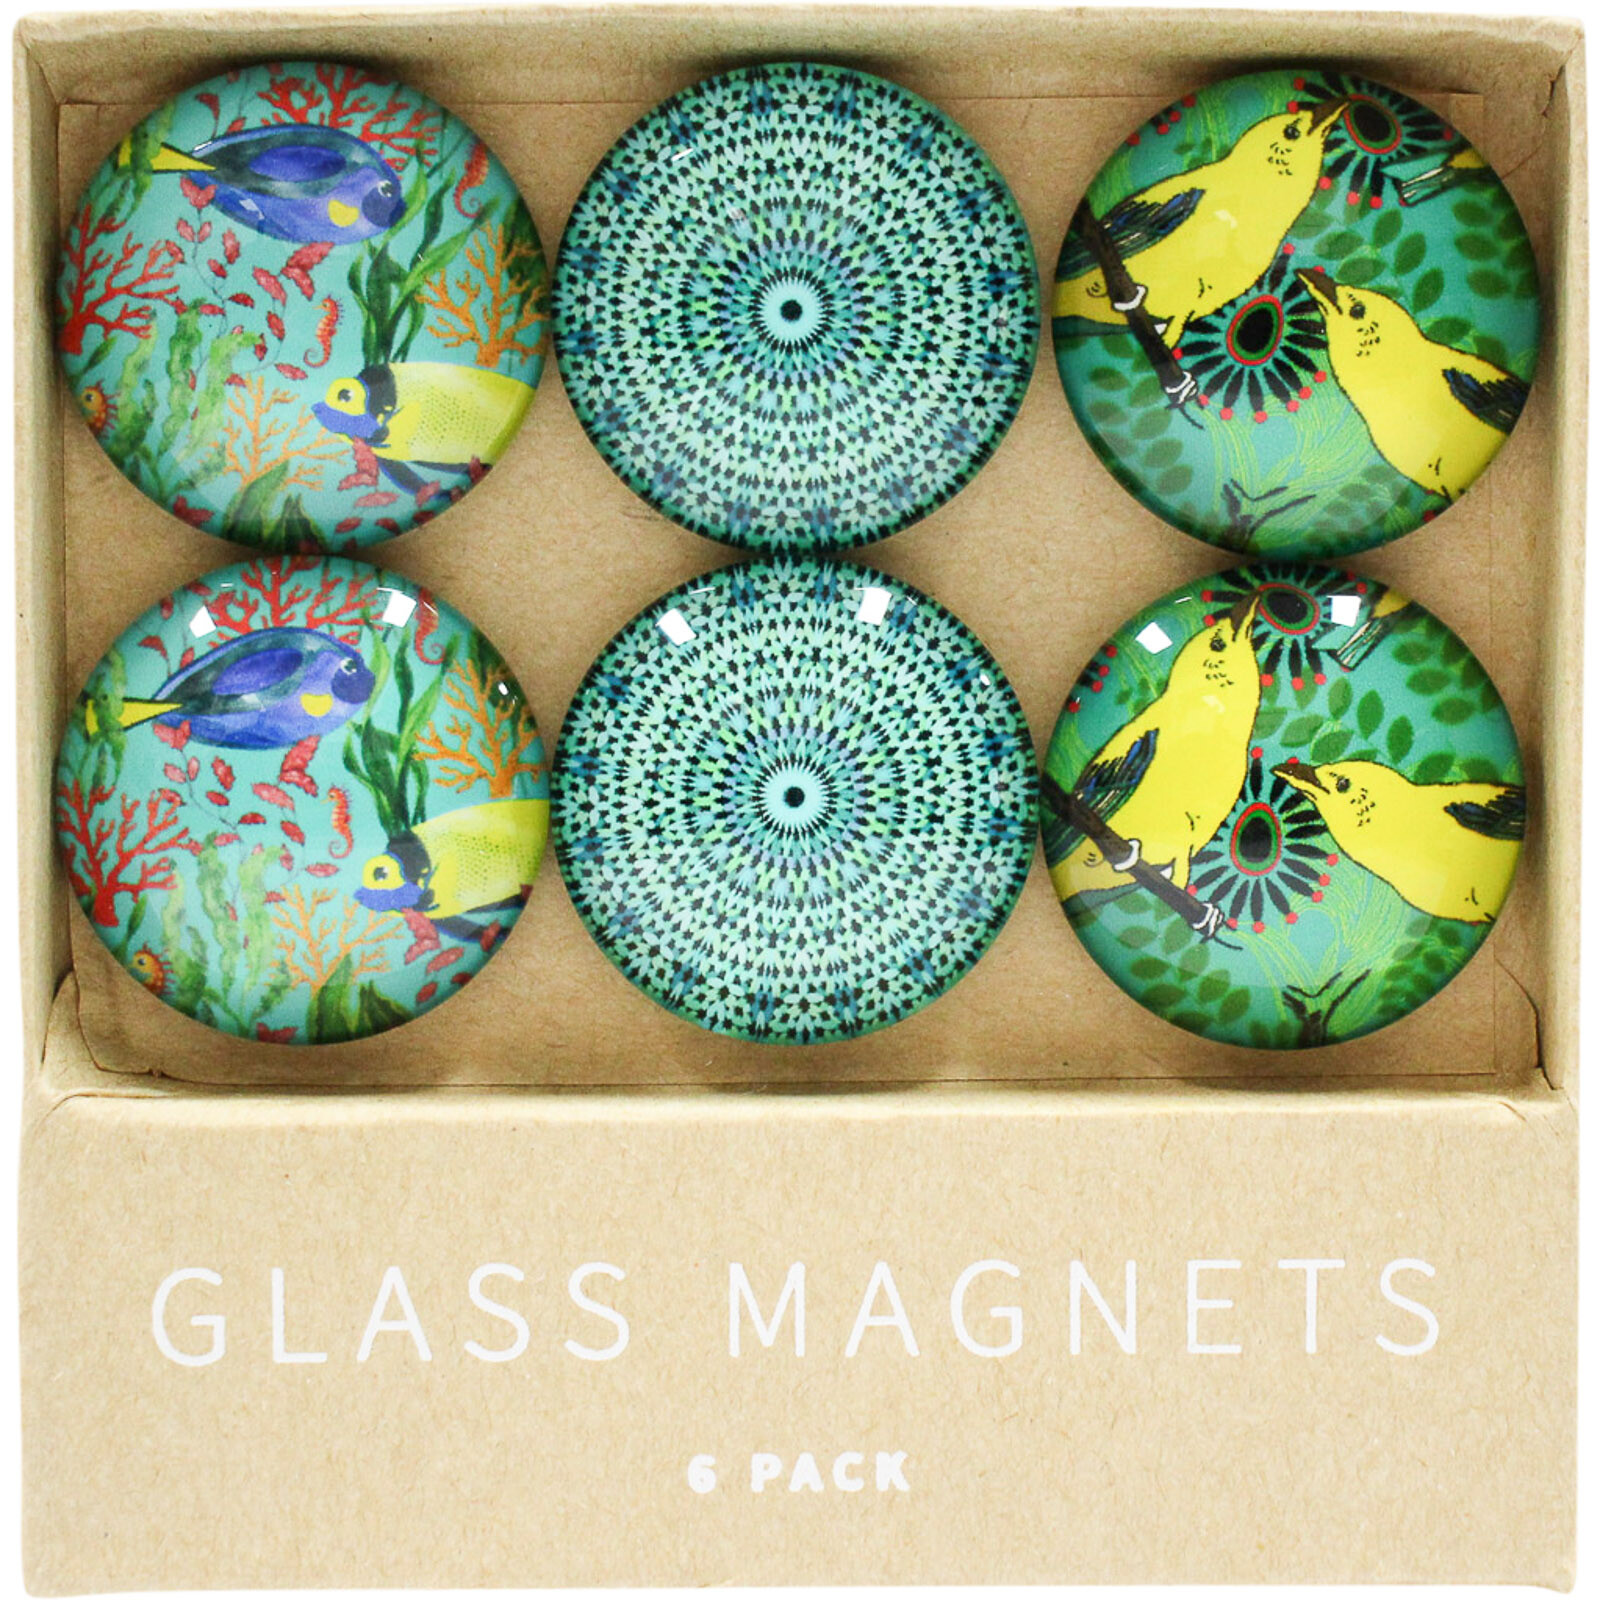 Glass Magnets Tropical Reef S/6